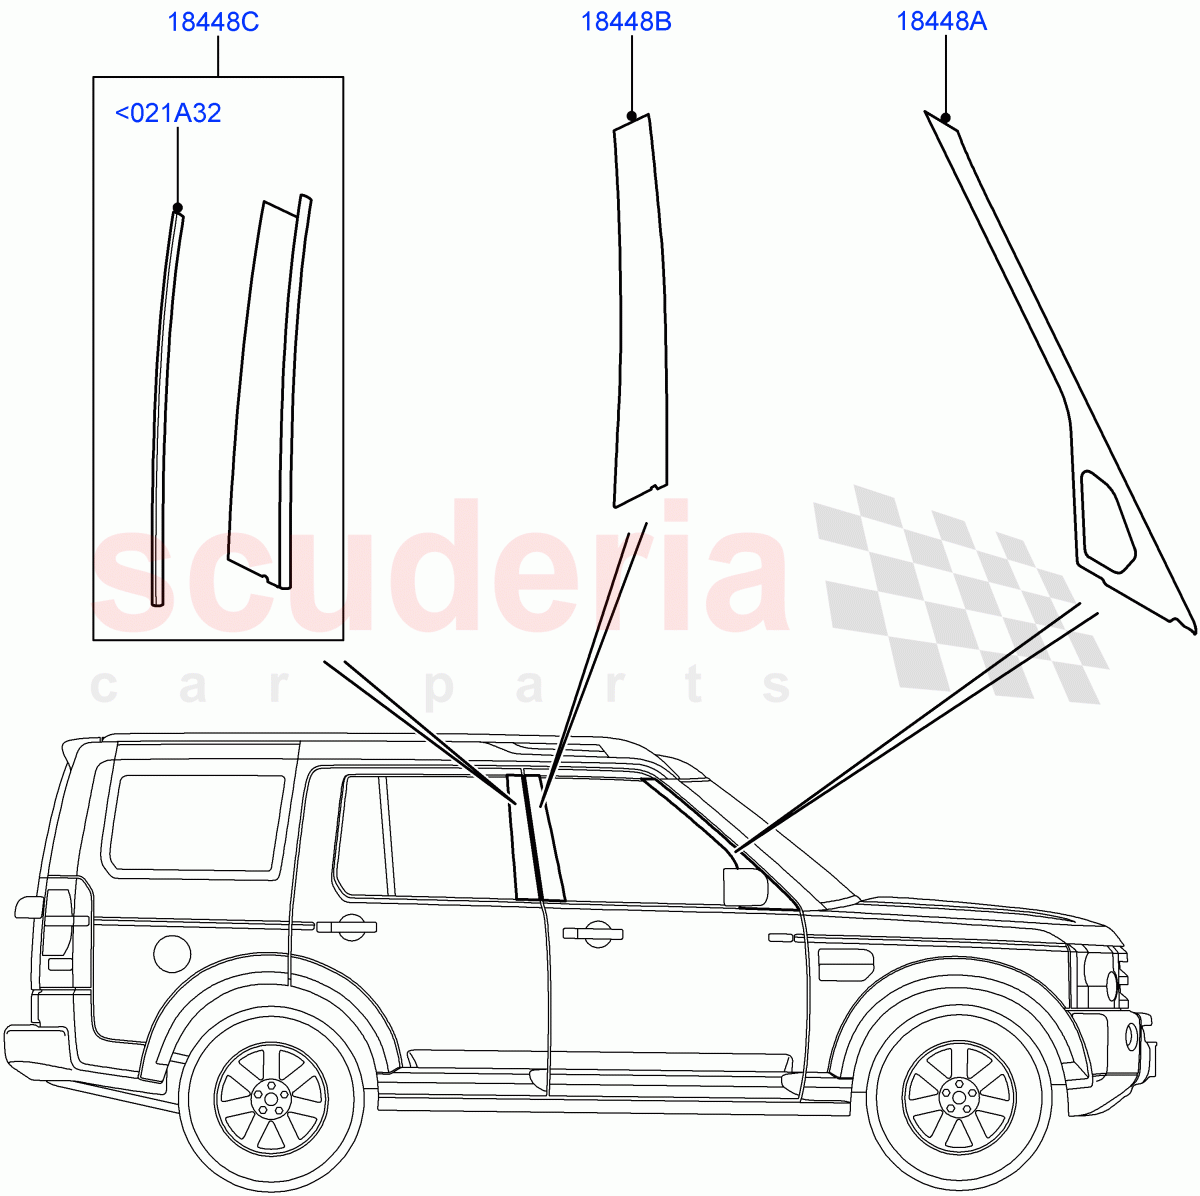 Rear Doors, Hinges & Weatherstrips((V)FROMAA000001) of Land Rover Land Rover Discovery 4 (2010-2016) [5.0 OHC SGDI NA V8 Petrol]